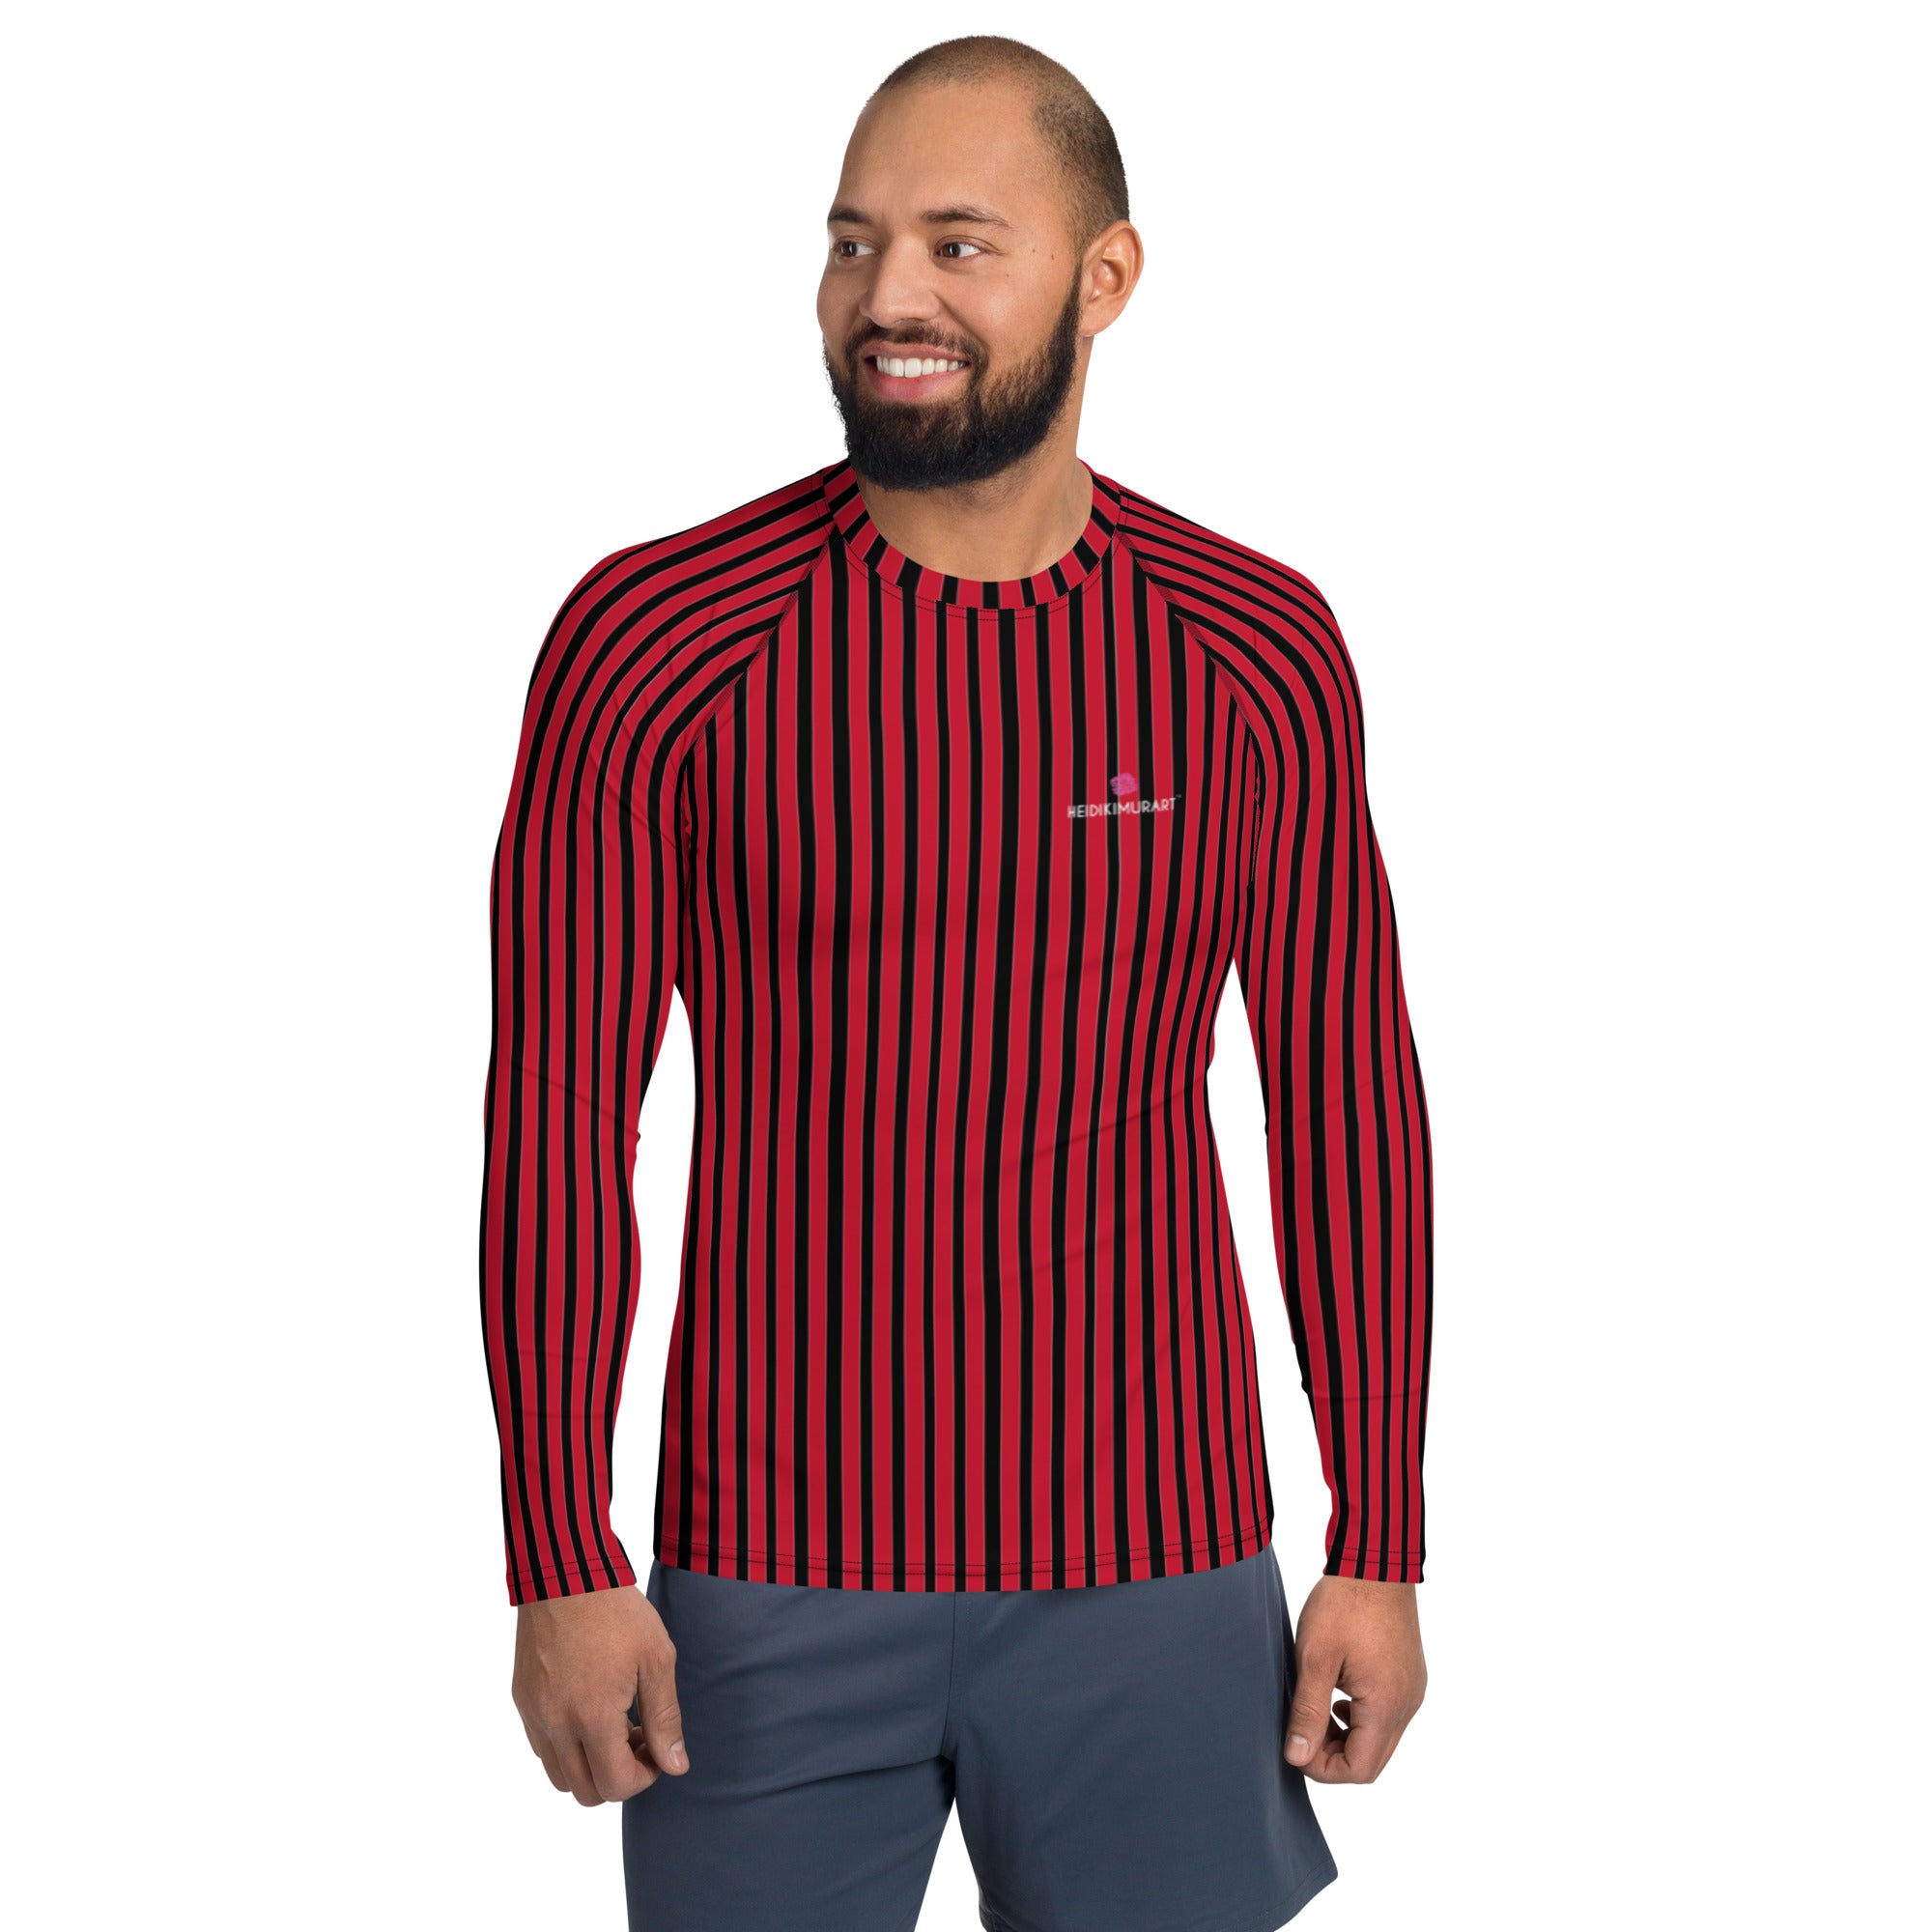 Red Striped Printed Men's Top, Red Black Stripes Print Best Men's Rash Guard UPF 50+ Long Sleeves Fitted Designer Polyester Spandex Moisture-Wicking Four Way Stretch Elastic Sportswear For Water Sports Wear - Made in USA/EU/MX (US Size: XS-3XL)